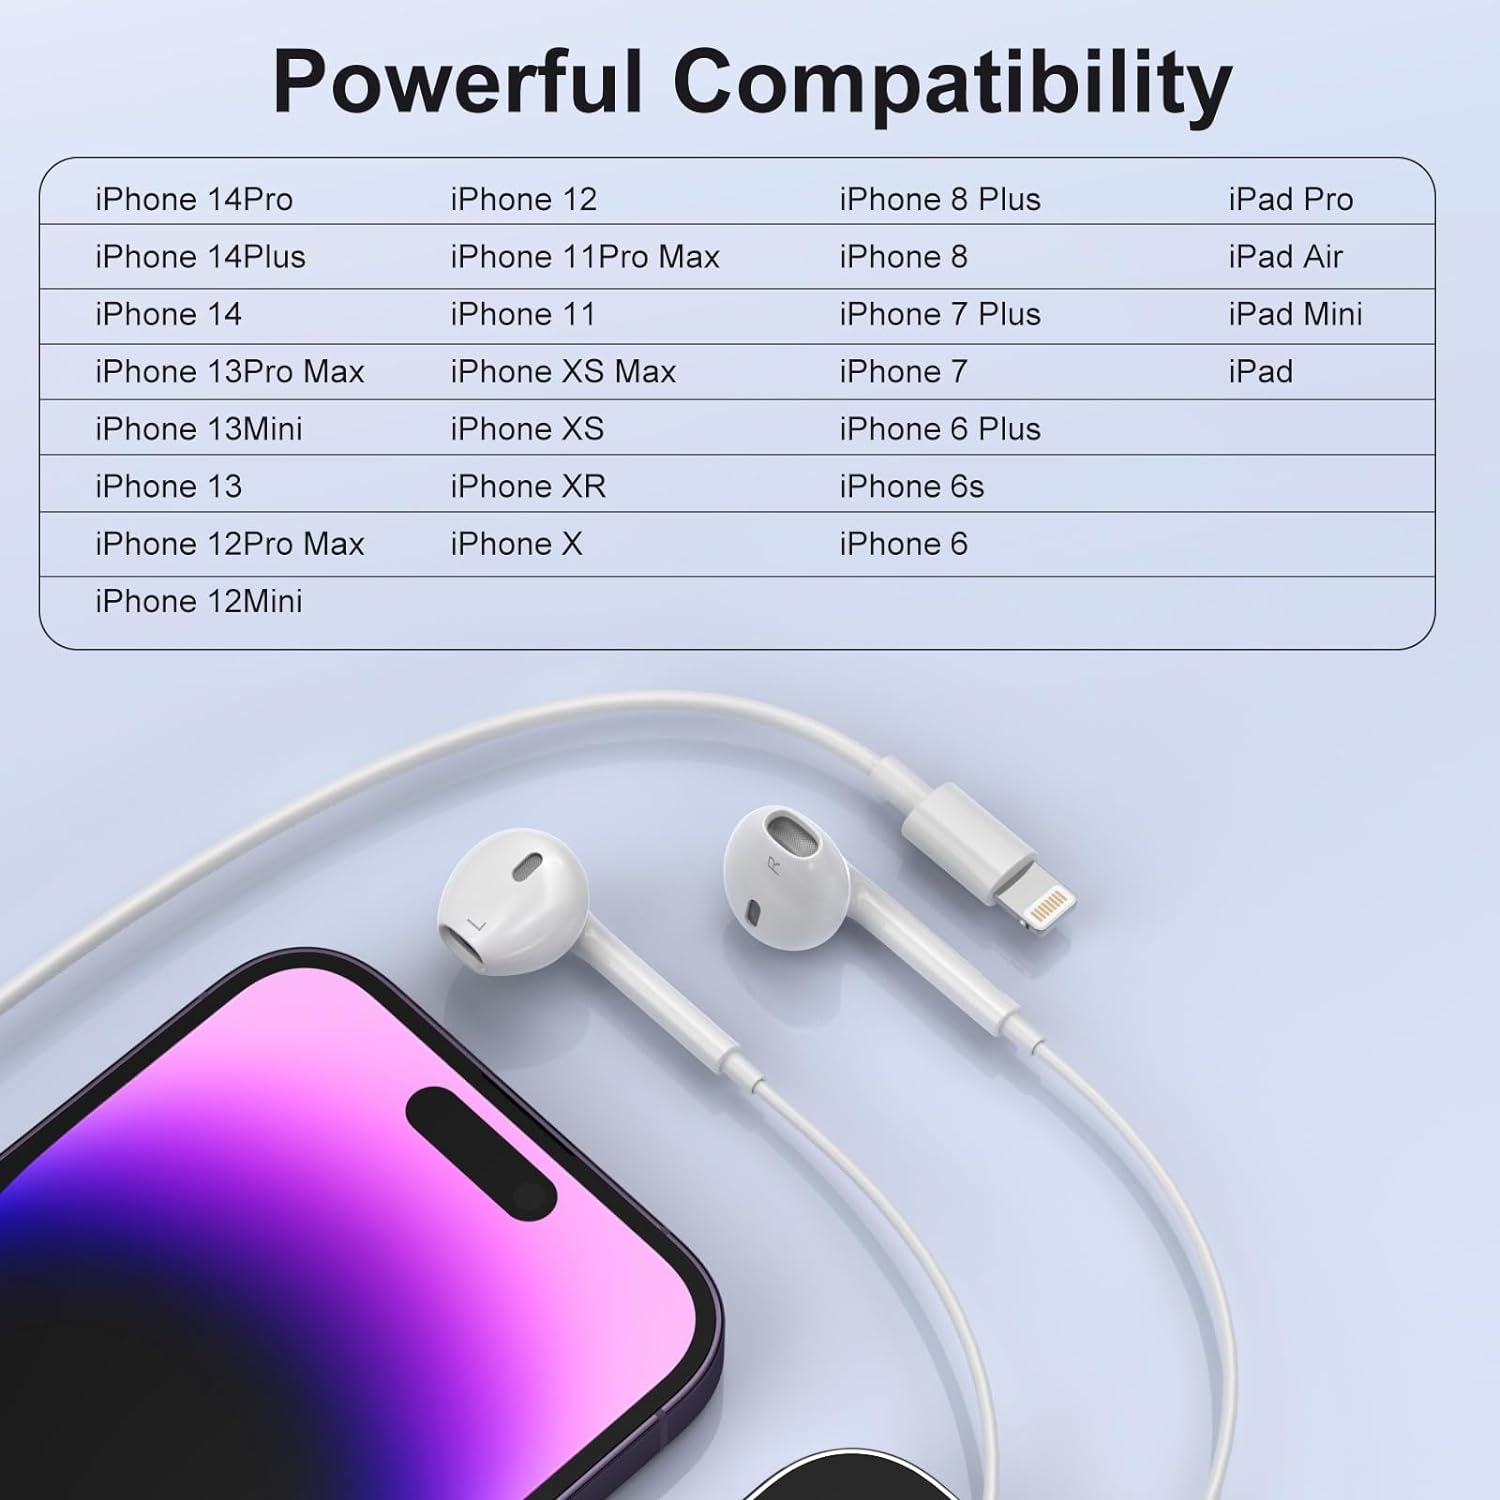 2 Pack - Apple Earbuds for iPhone Headphones: A Review of Comfort and Sound Quality